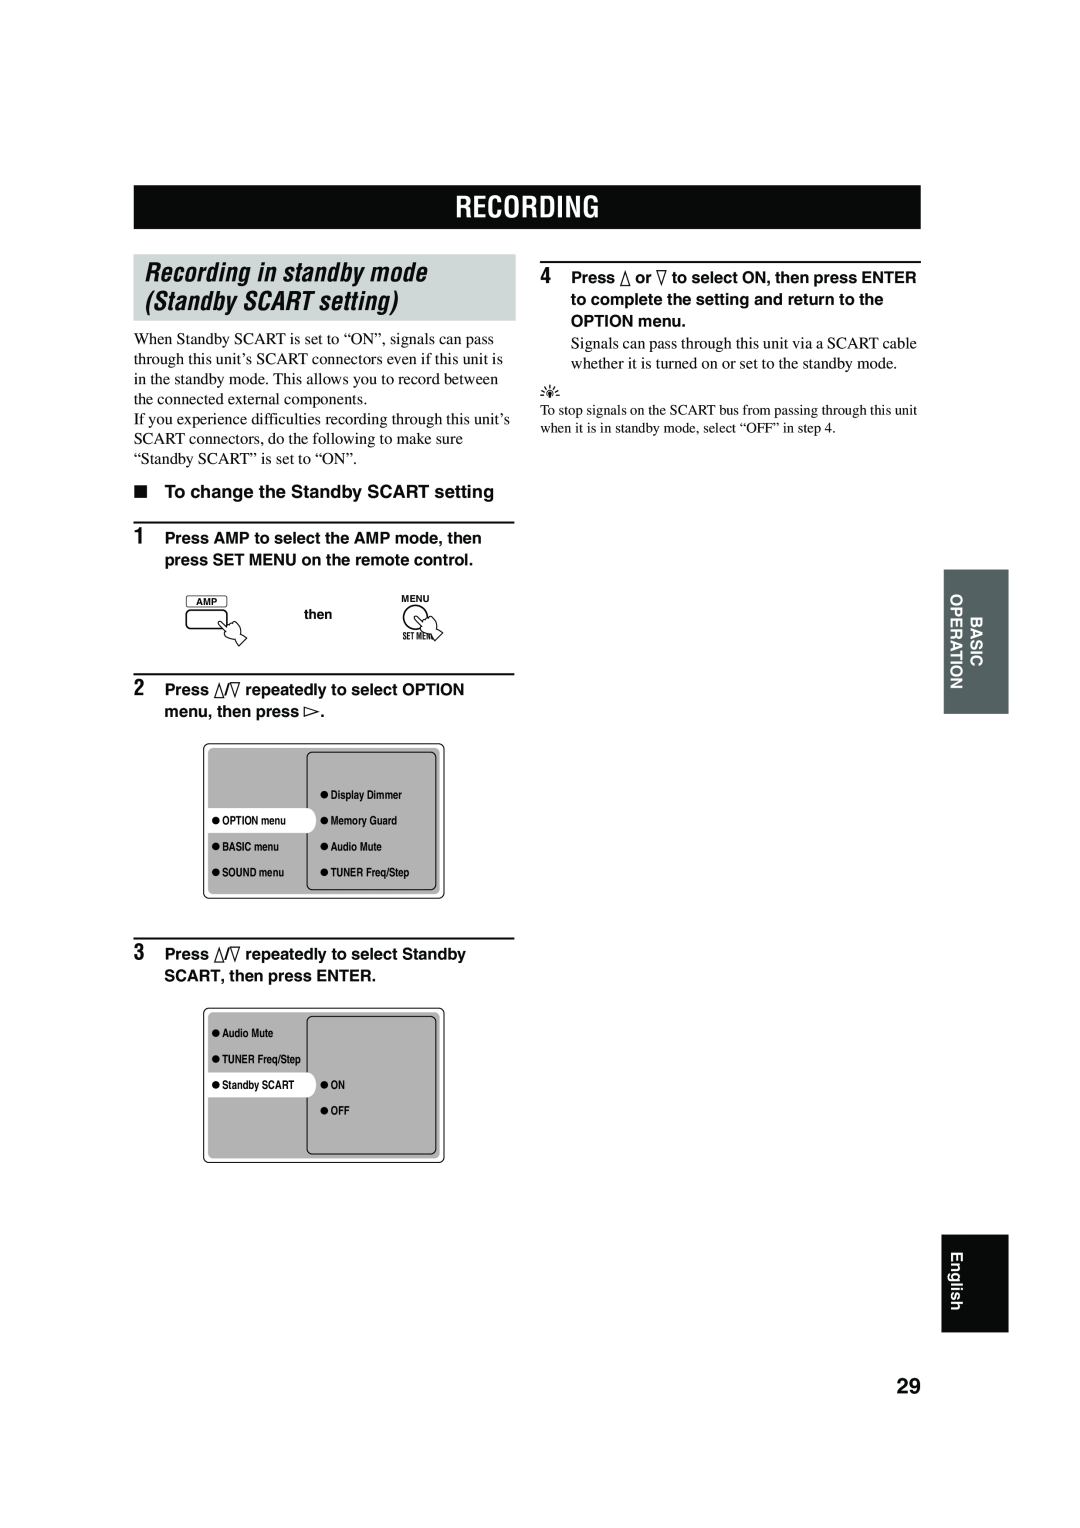 Yamaha RX-SL100RDS owner manual Recording in standby mode Standby SCART setting, To change the Standby SCART setting 